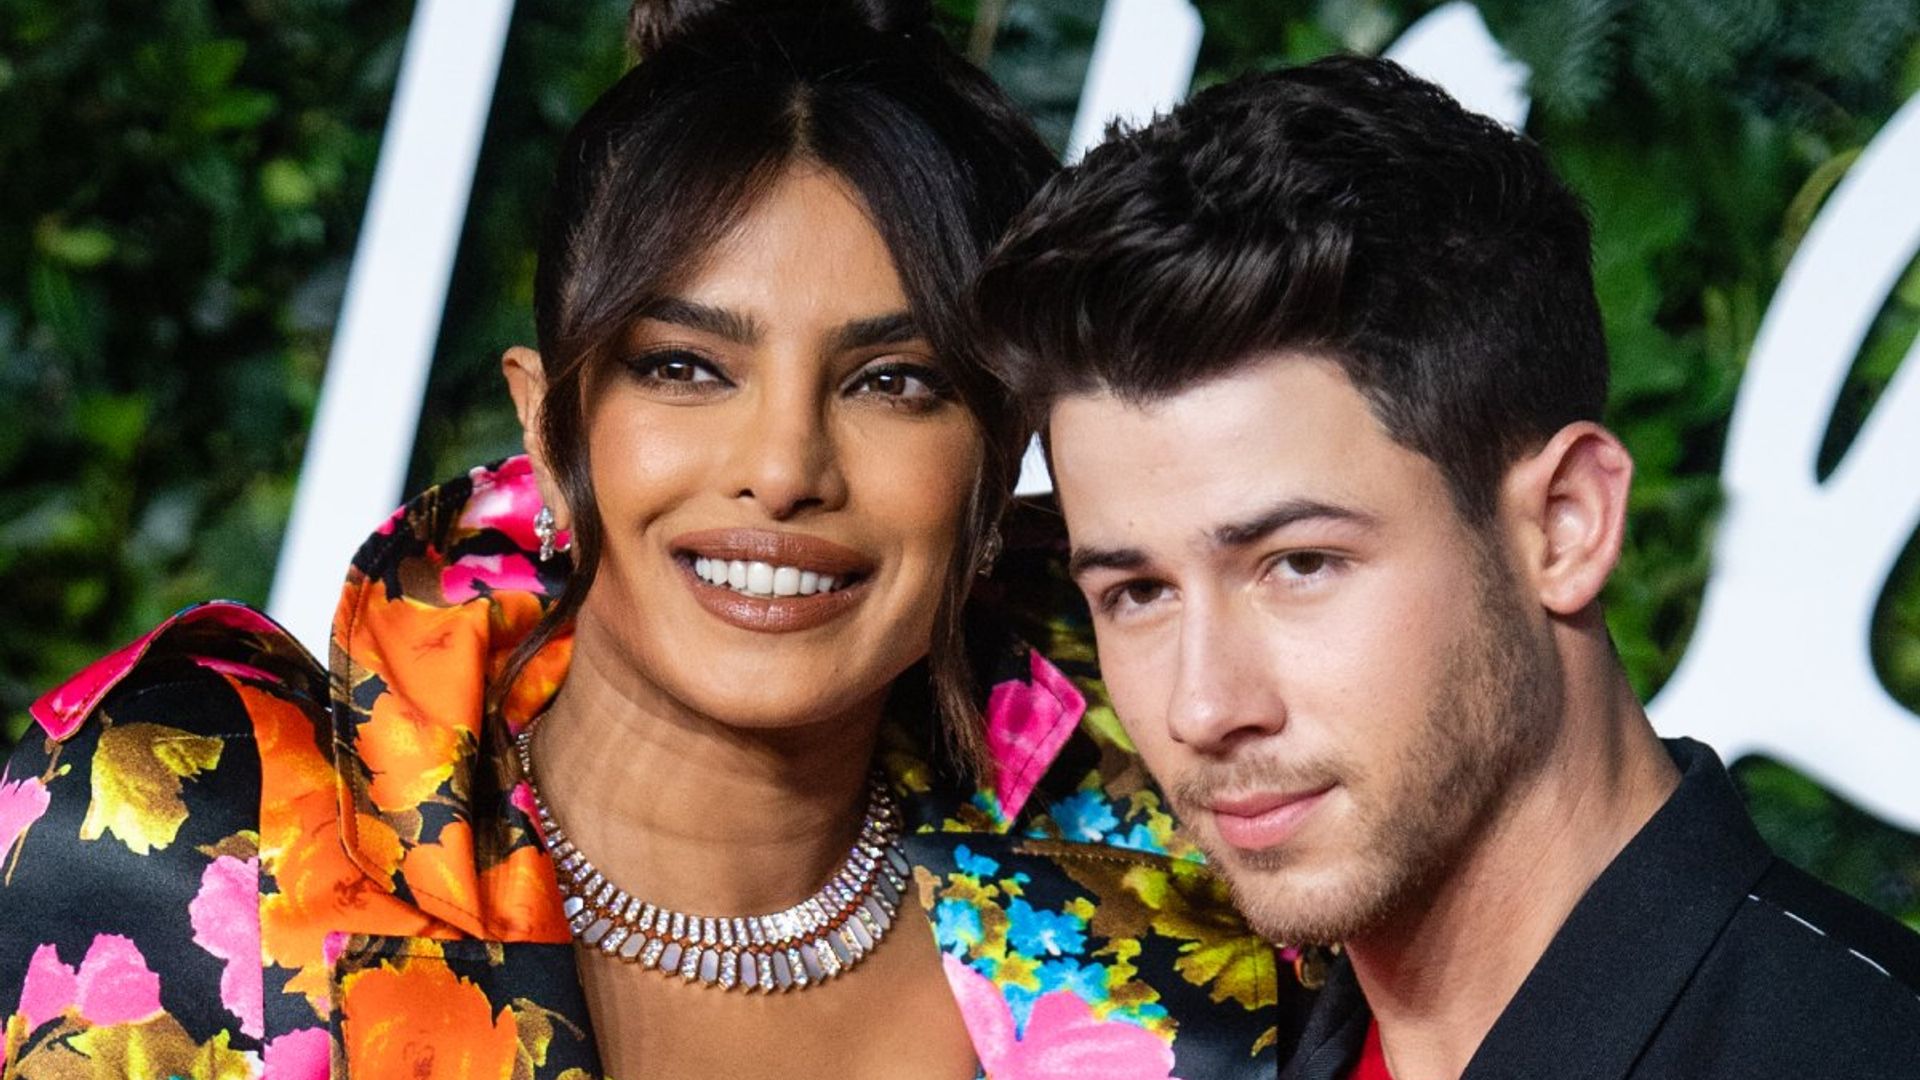 Priyanka Chopra and Nick Jonas 'feeling blessed' as they share Holi celebrations with fans